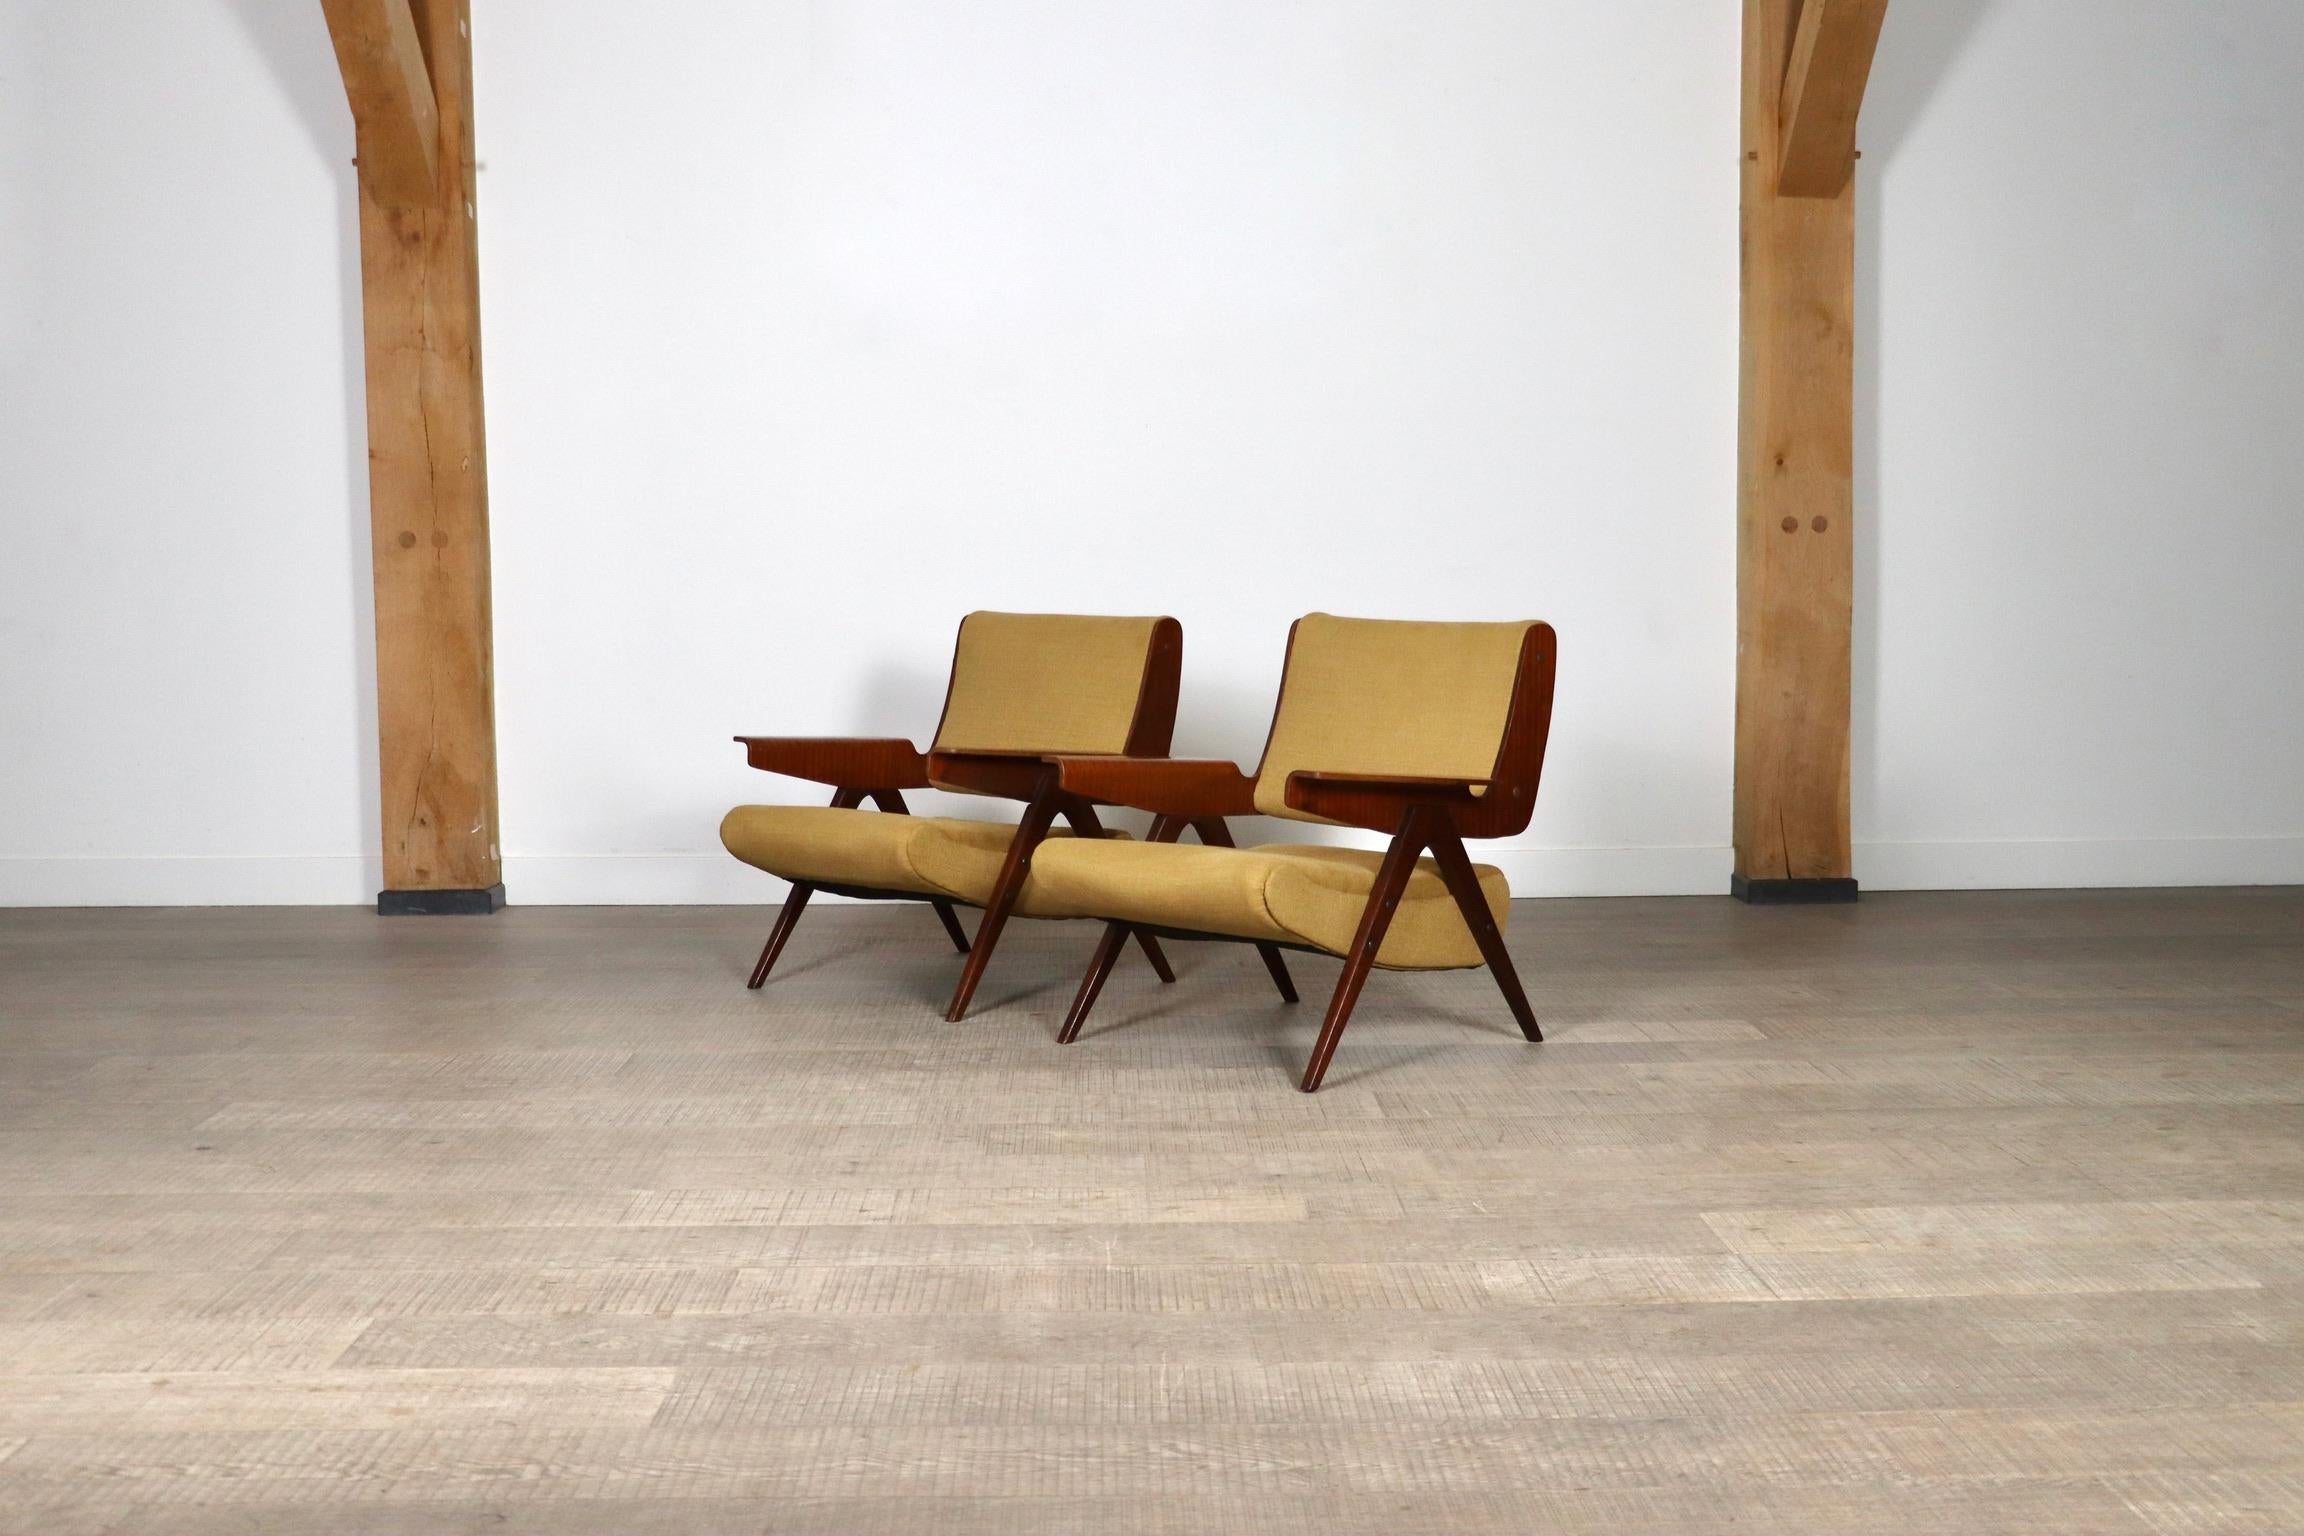 Pair Of Gianfranco Frattini Model 831 Lounge Chairs For Cassina, 1950s For Sale 2